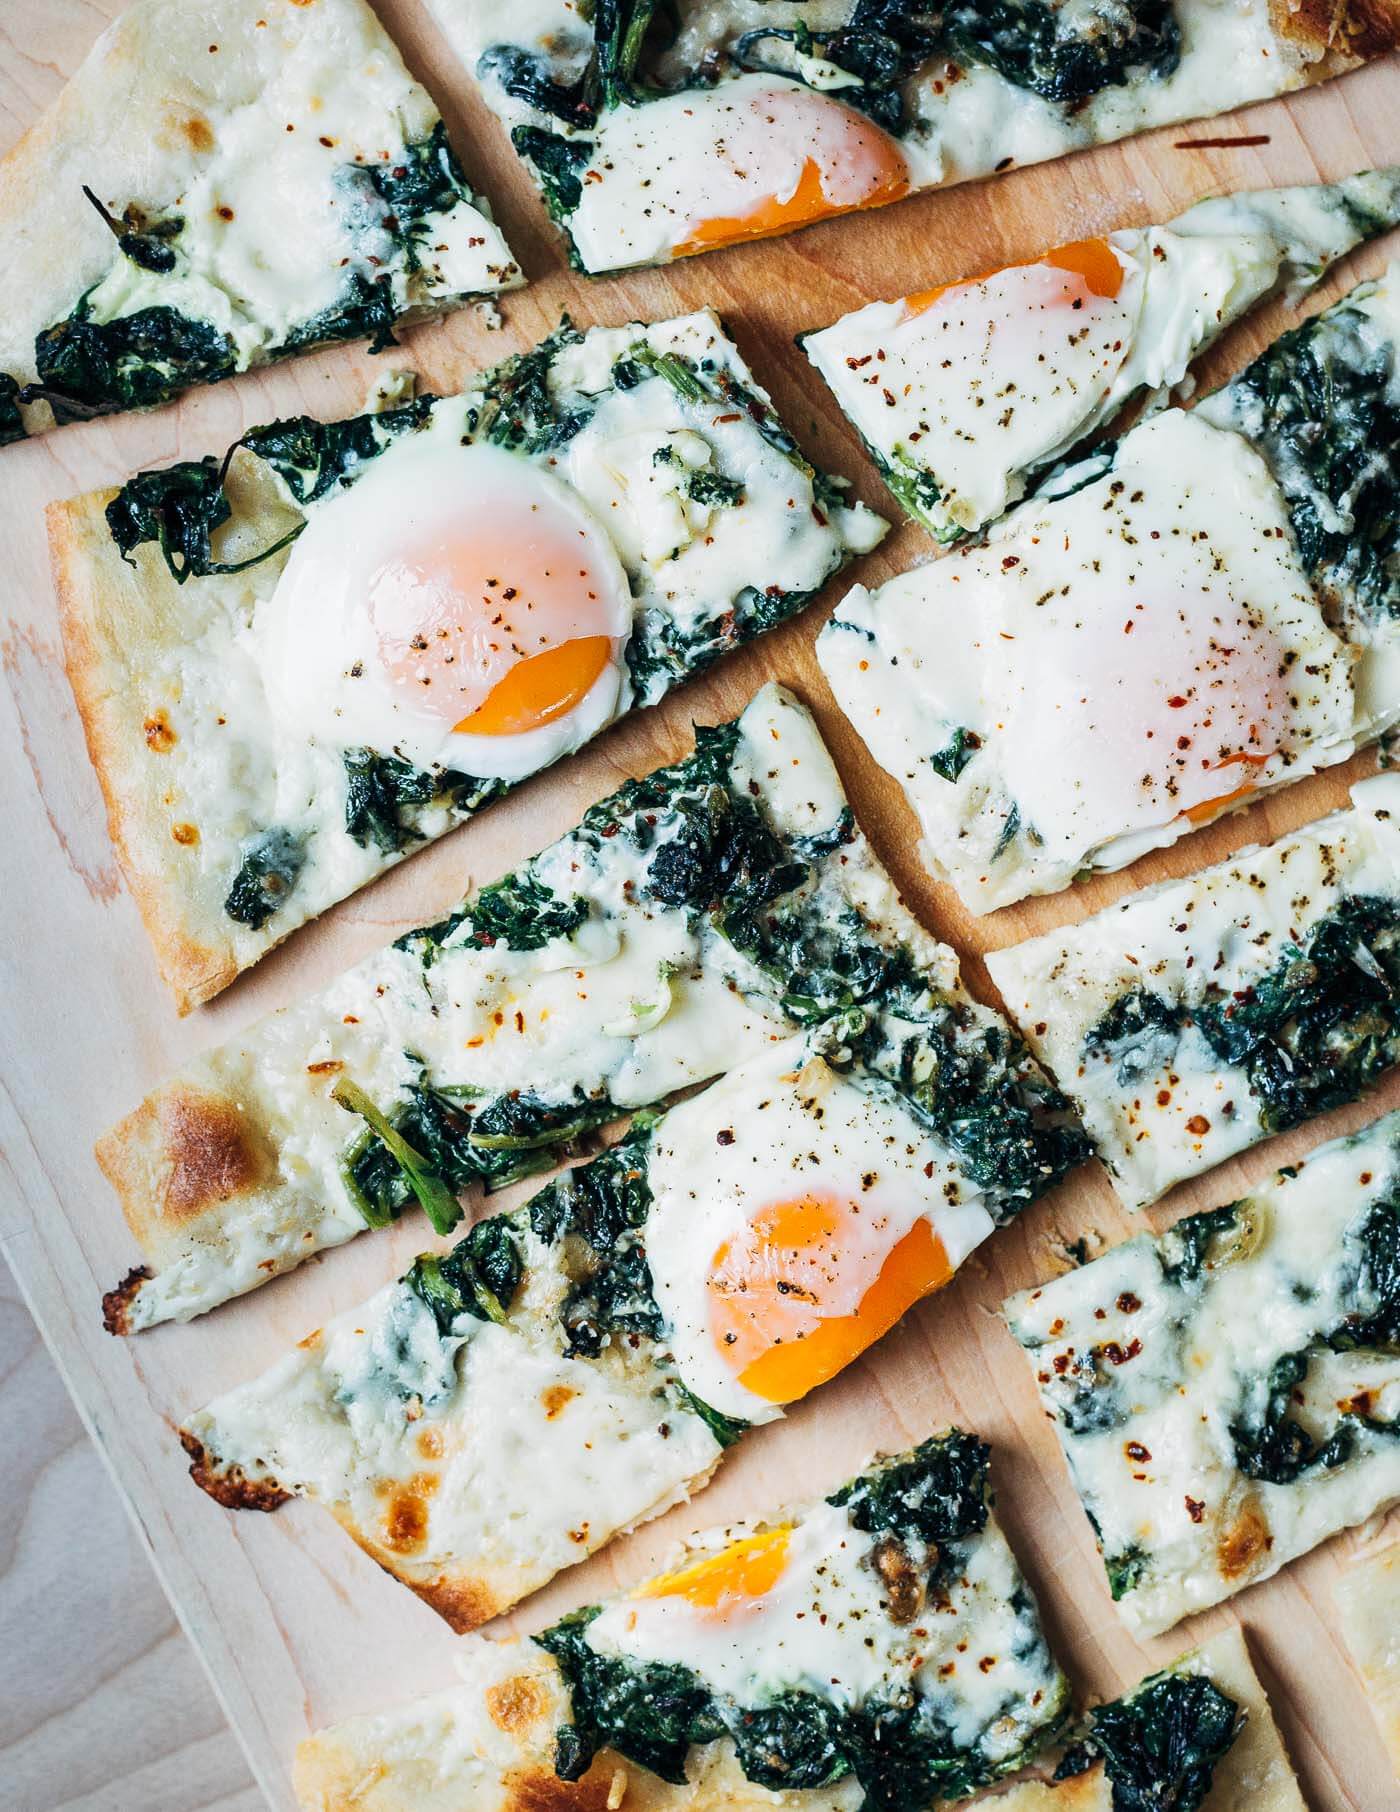 Vibrant greens, just-set eggs, and creamy mozzarella atop a thin but chewy pizza crust make this egg and greens pizza the perfect early spring recipe.